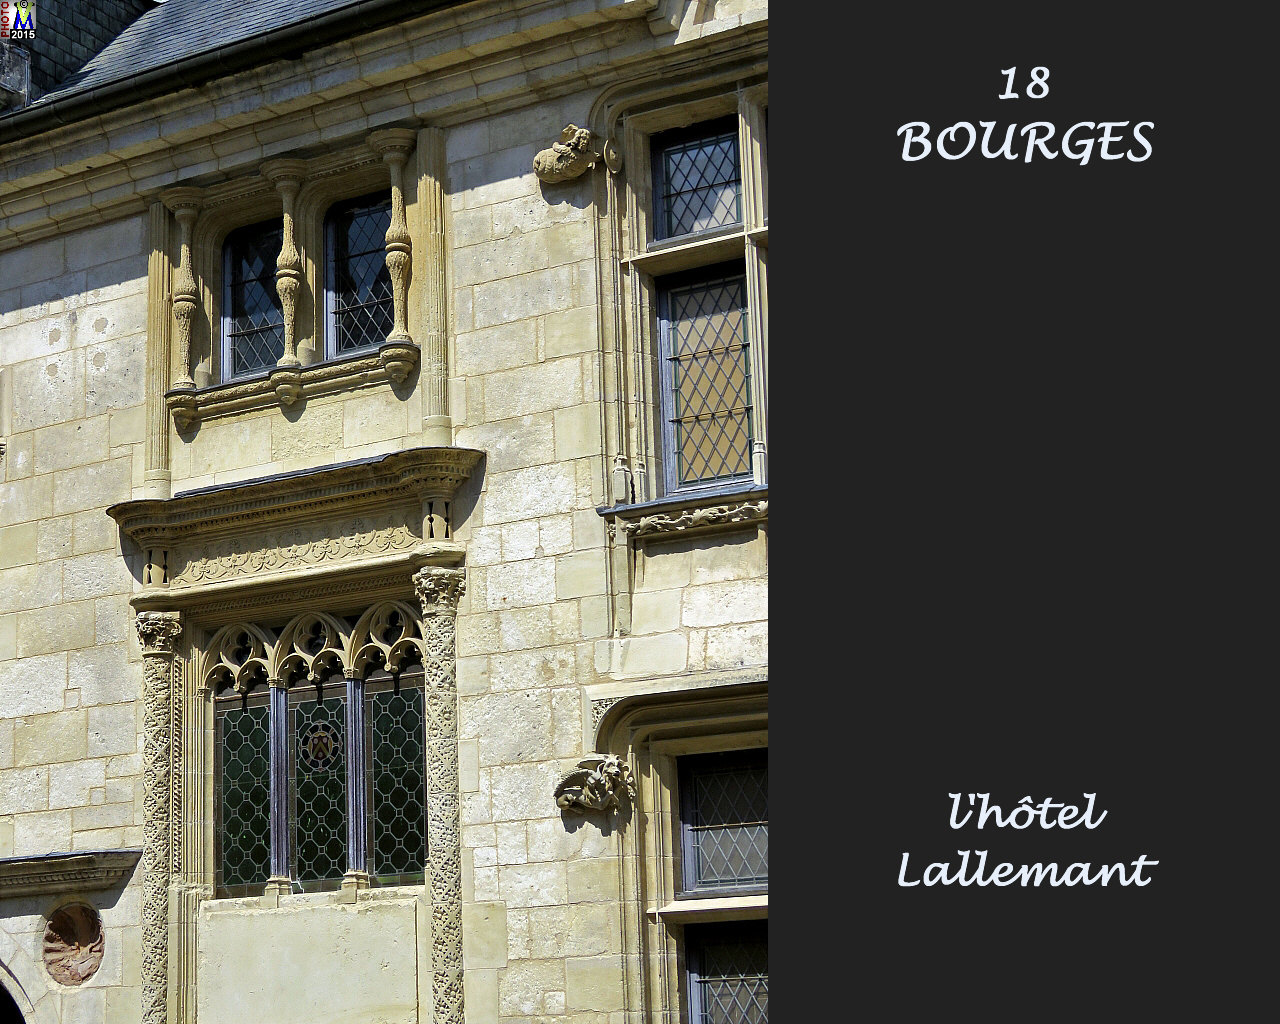 18BOURGES-hotelLallemant_128.jpg